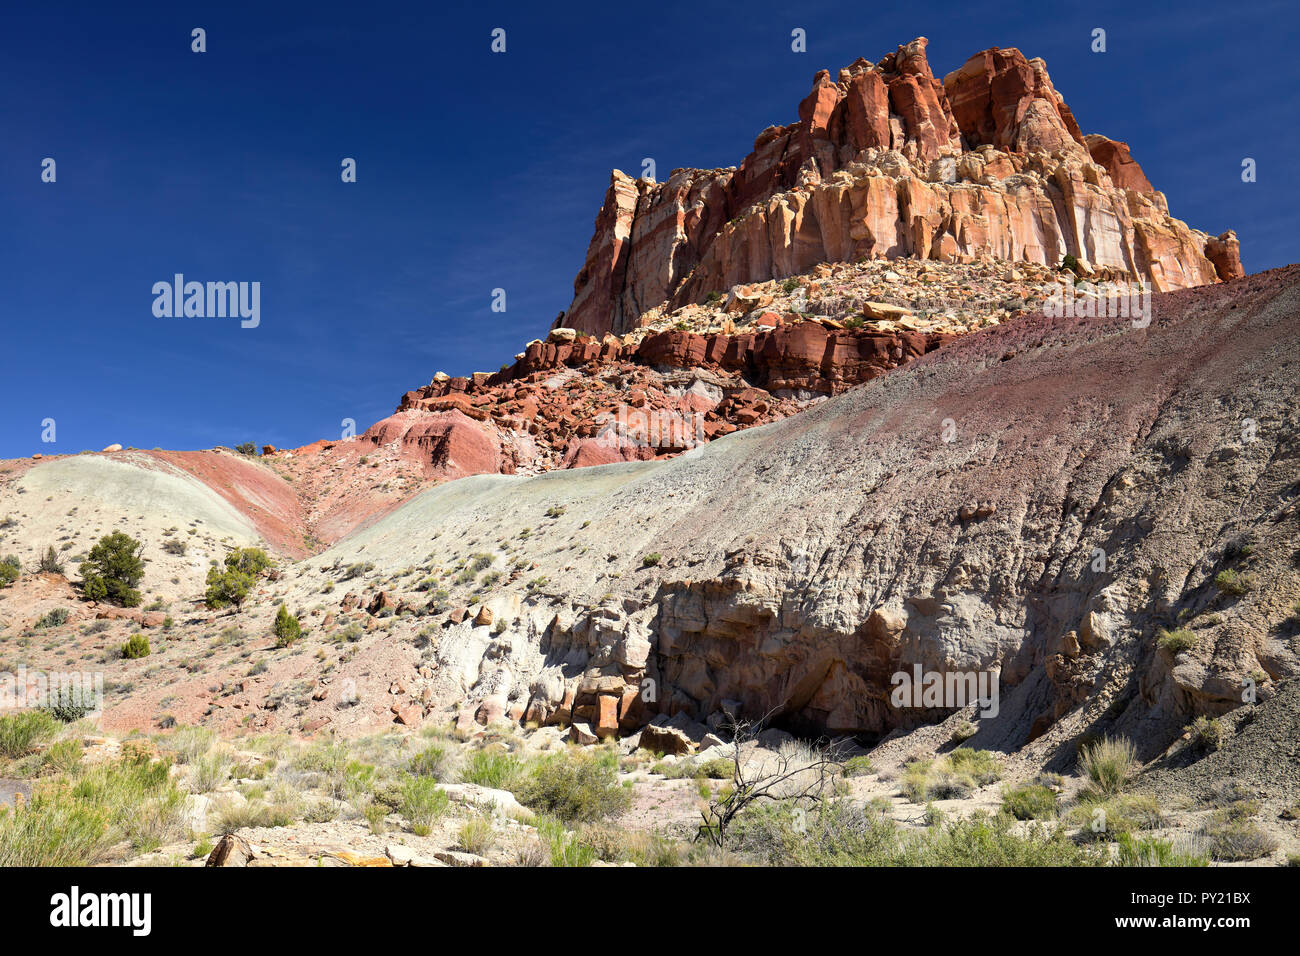 Landscape view of Capitol Reef in Utah, USA Stock Photo